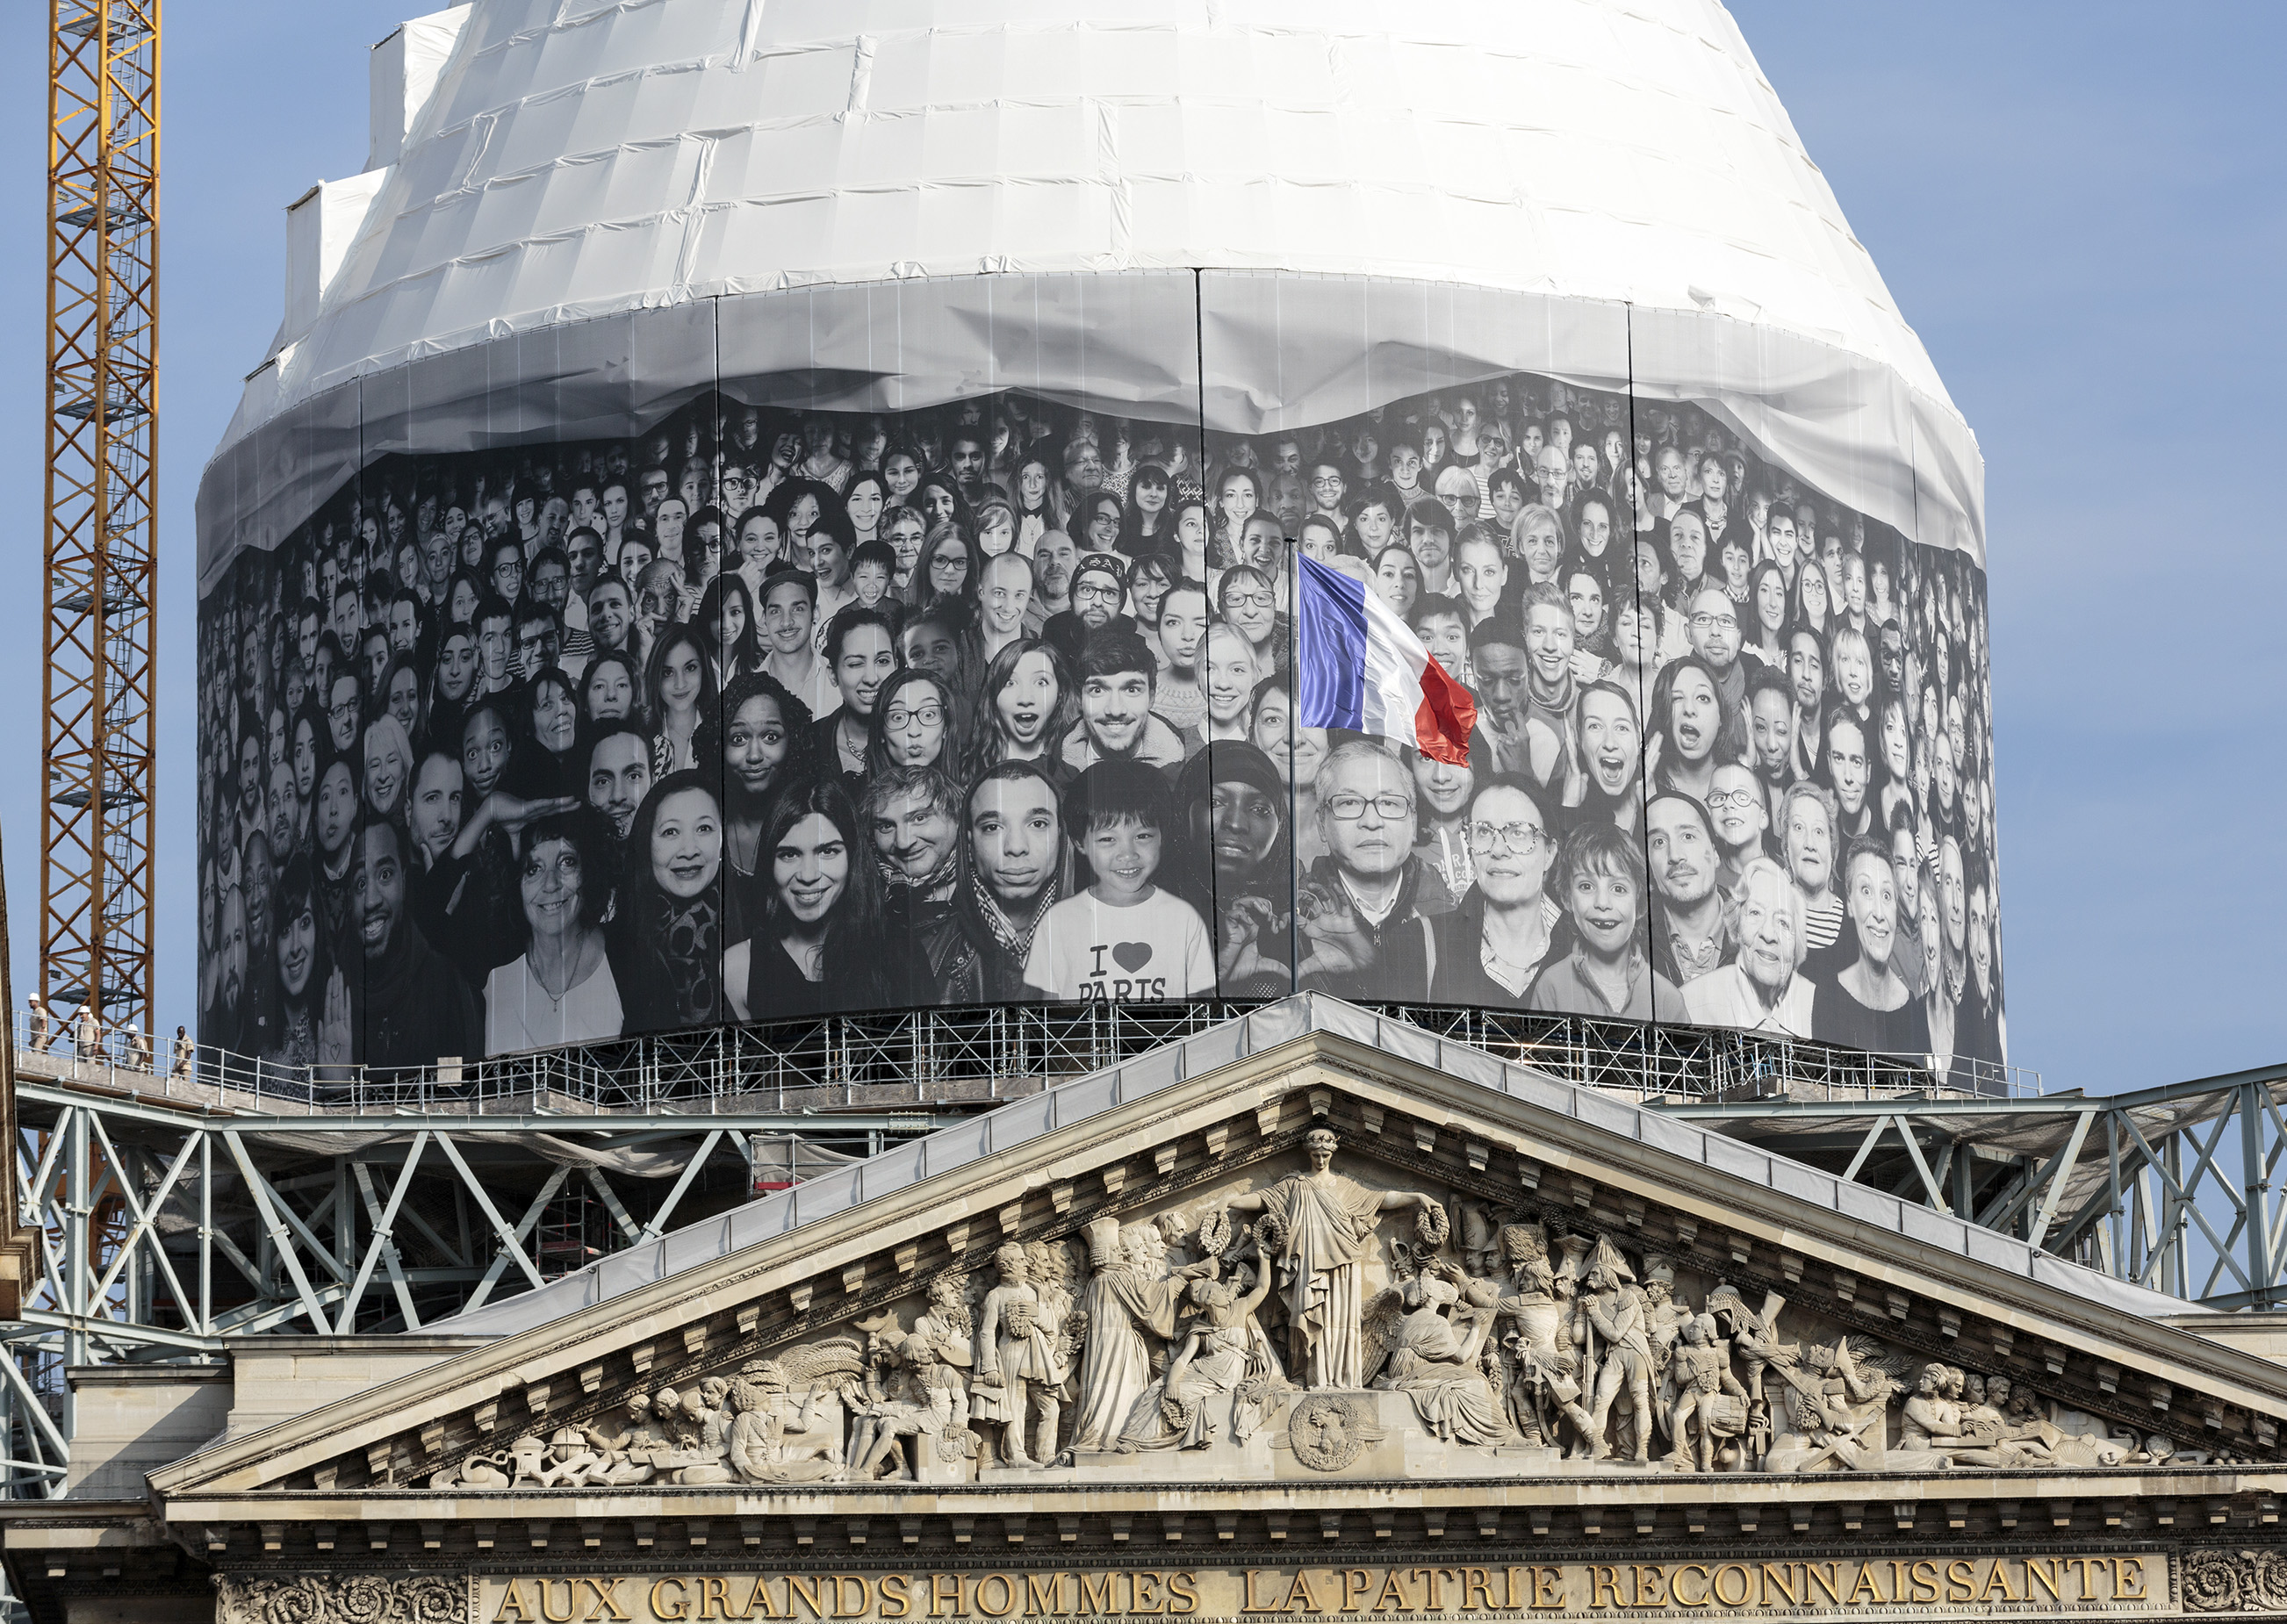 Dome of the Pantheon building covered in wrap with people's faces on